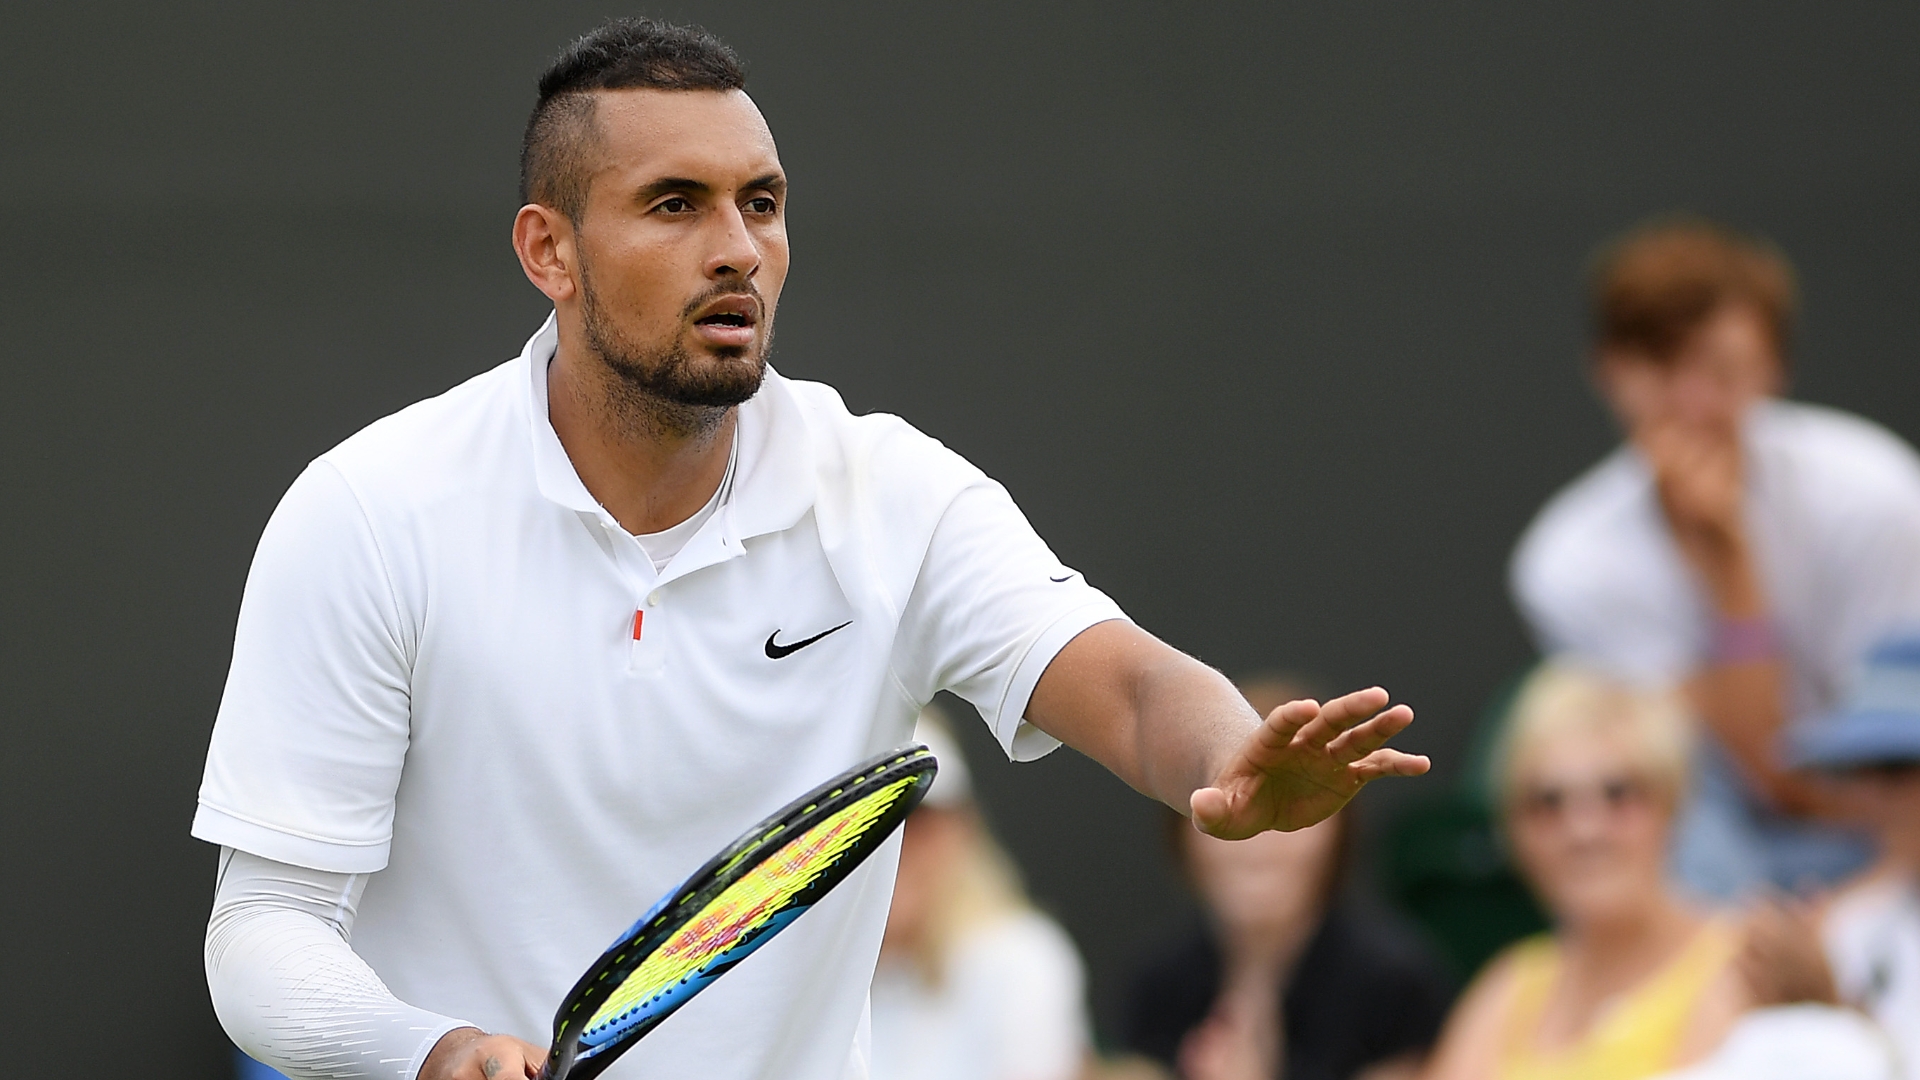 Kyrgios finishes off Thompson in 5 sets - Stream the Video